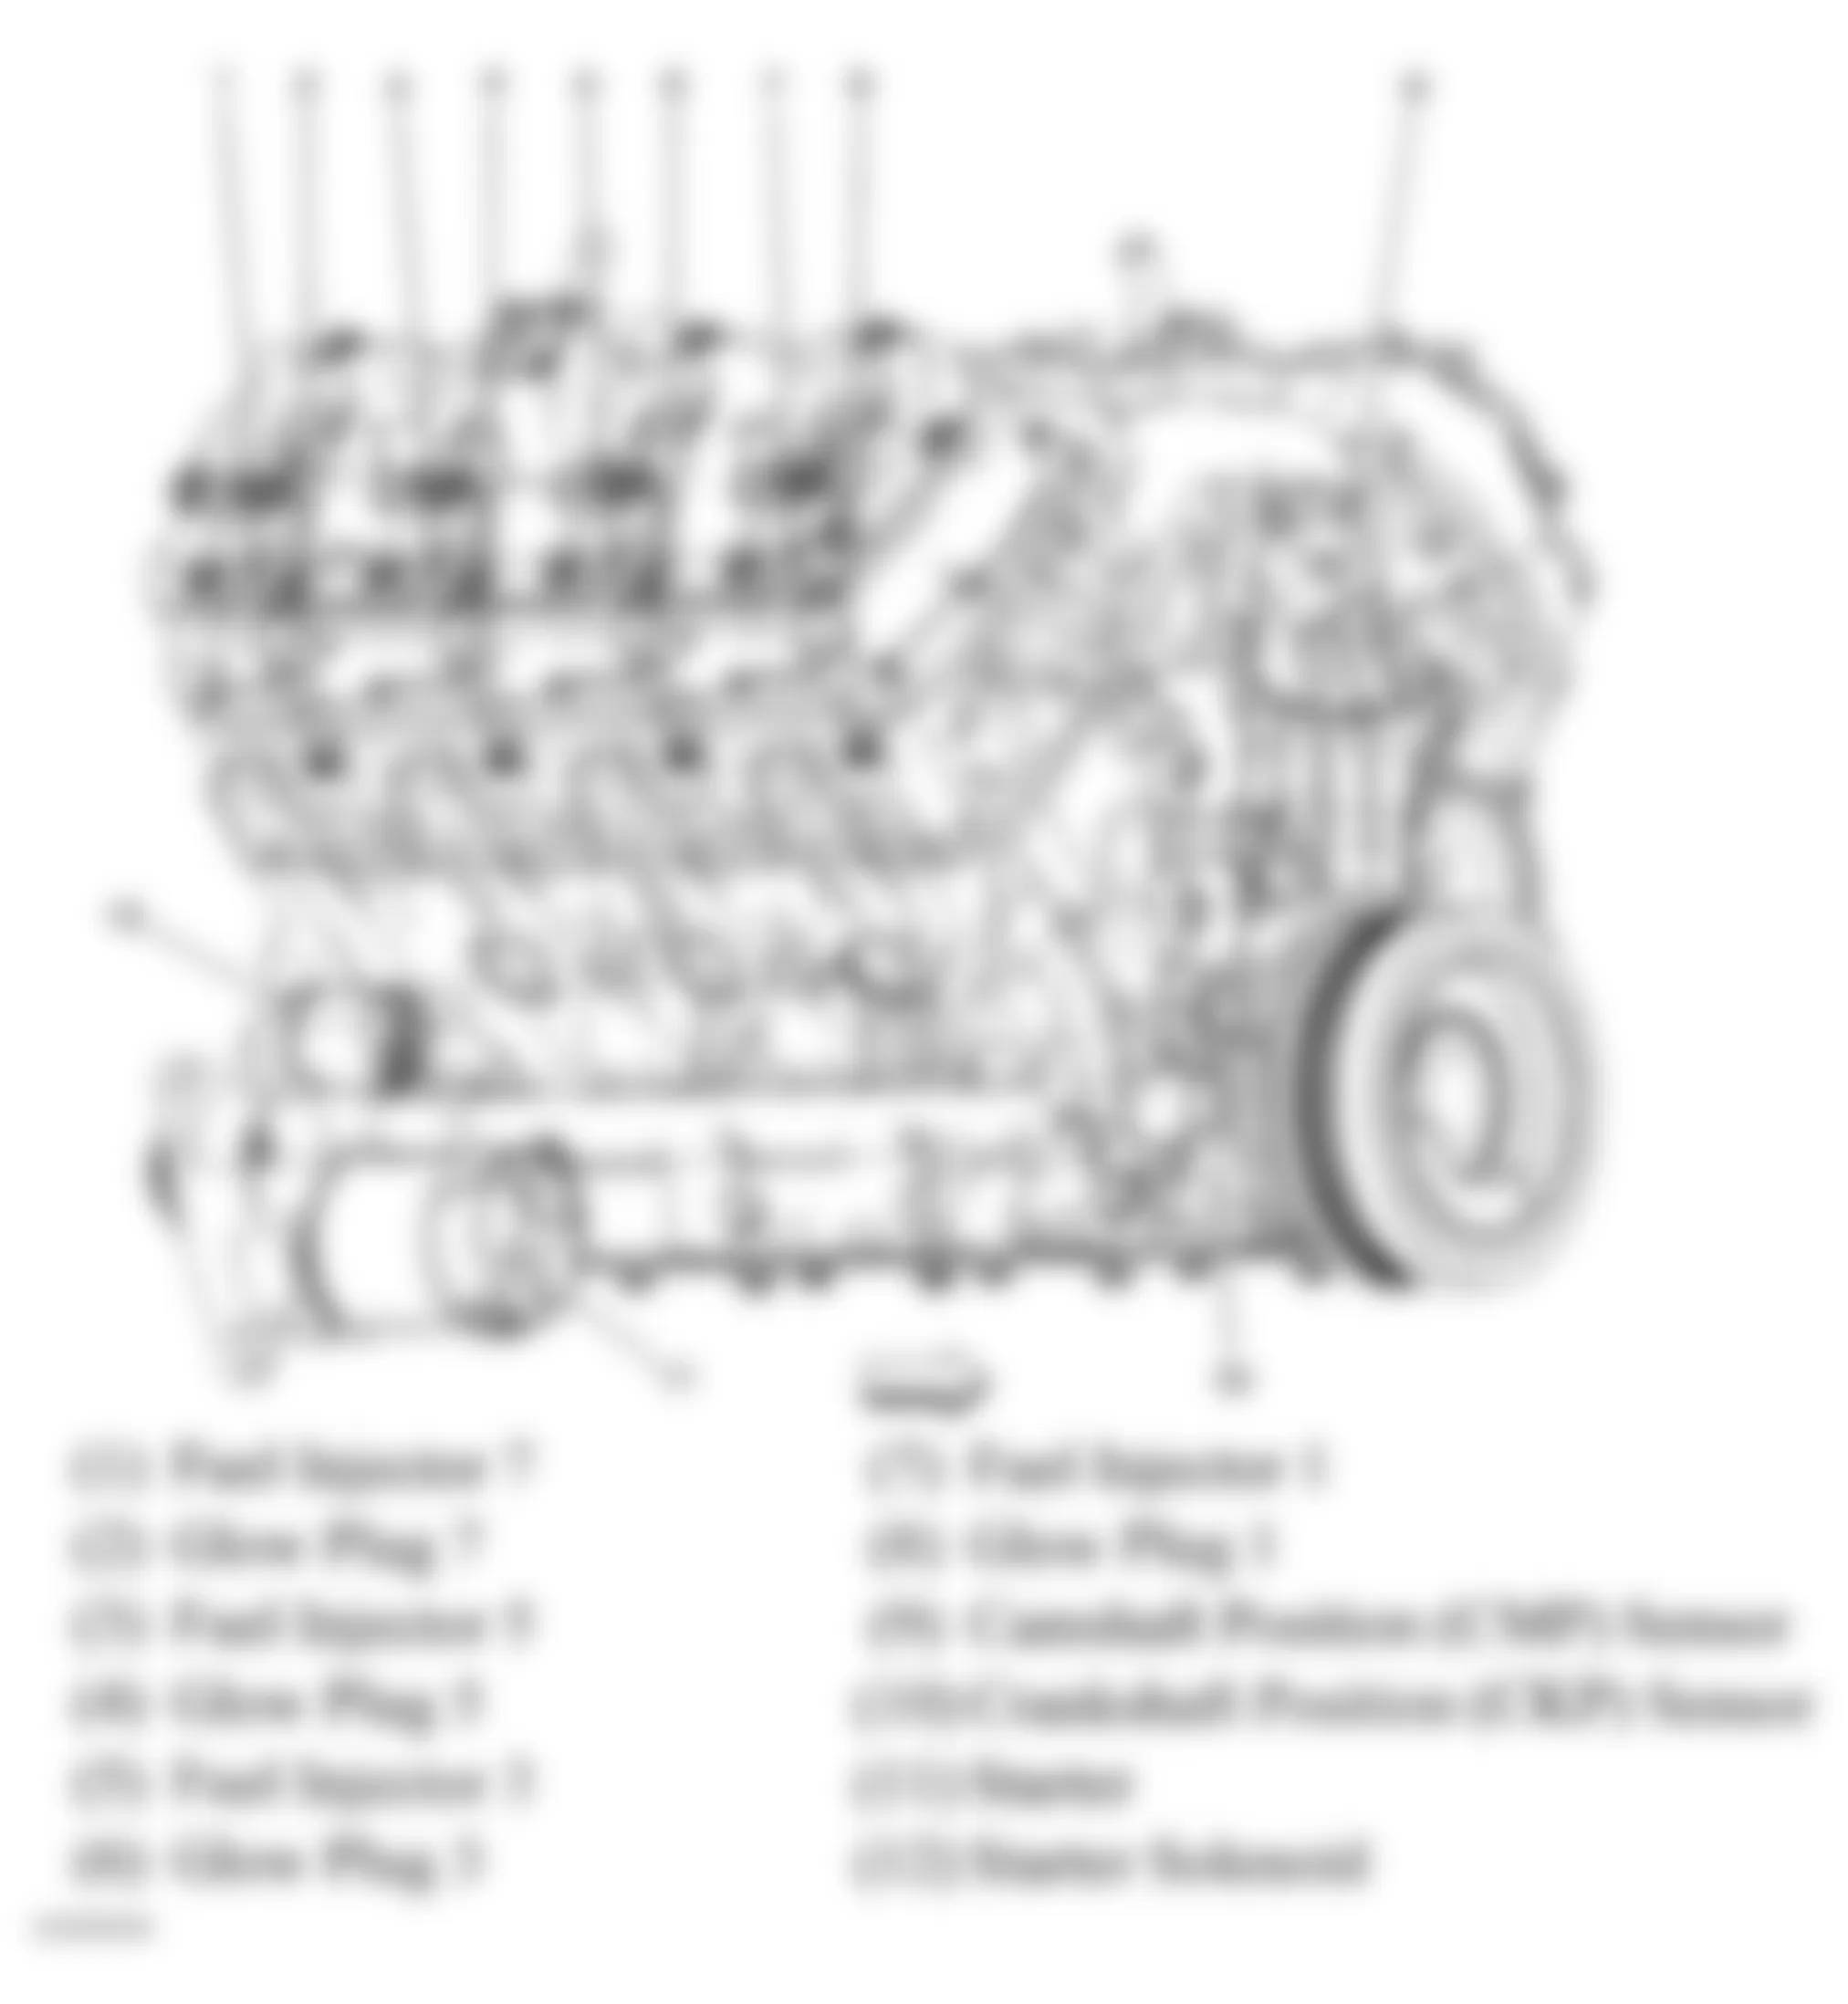 GMC Savana G1500 2009 - Component Locations -  Right Side Of Engine (6.6L)